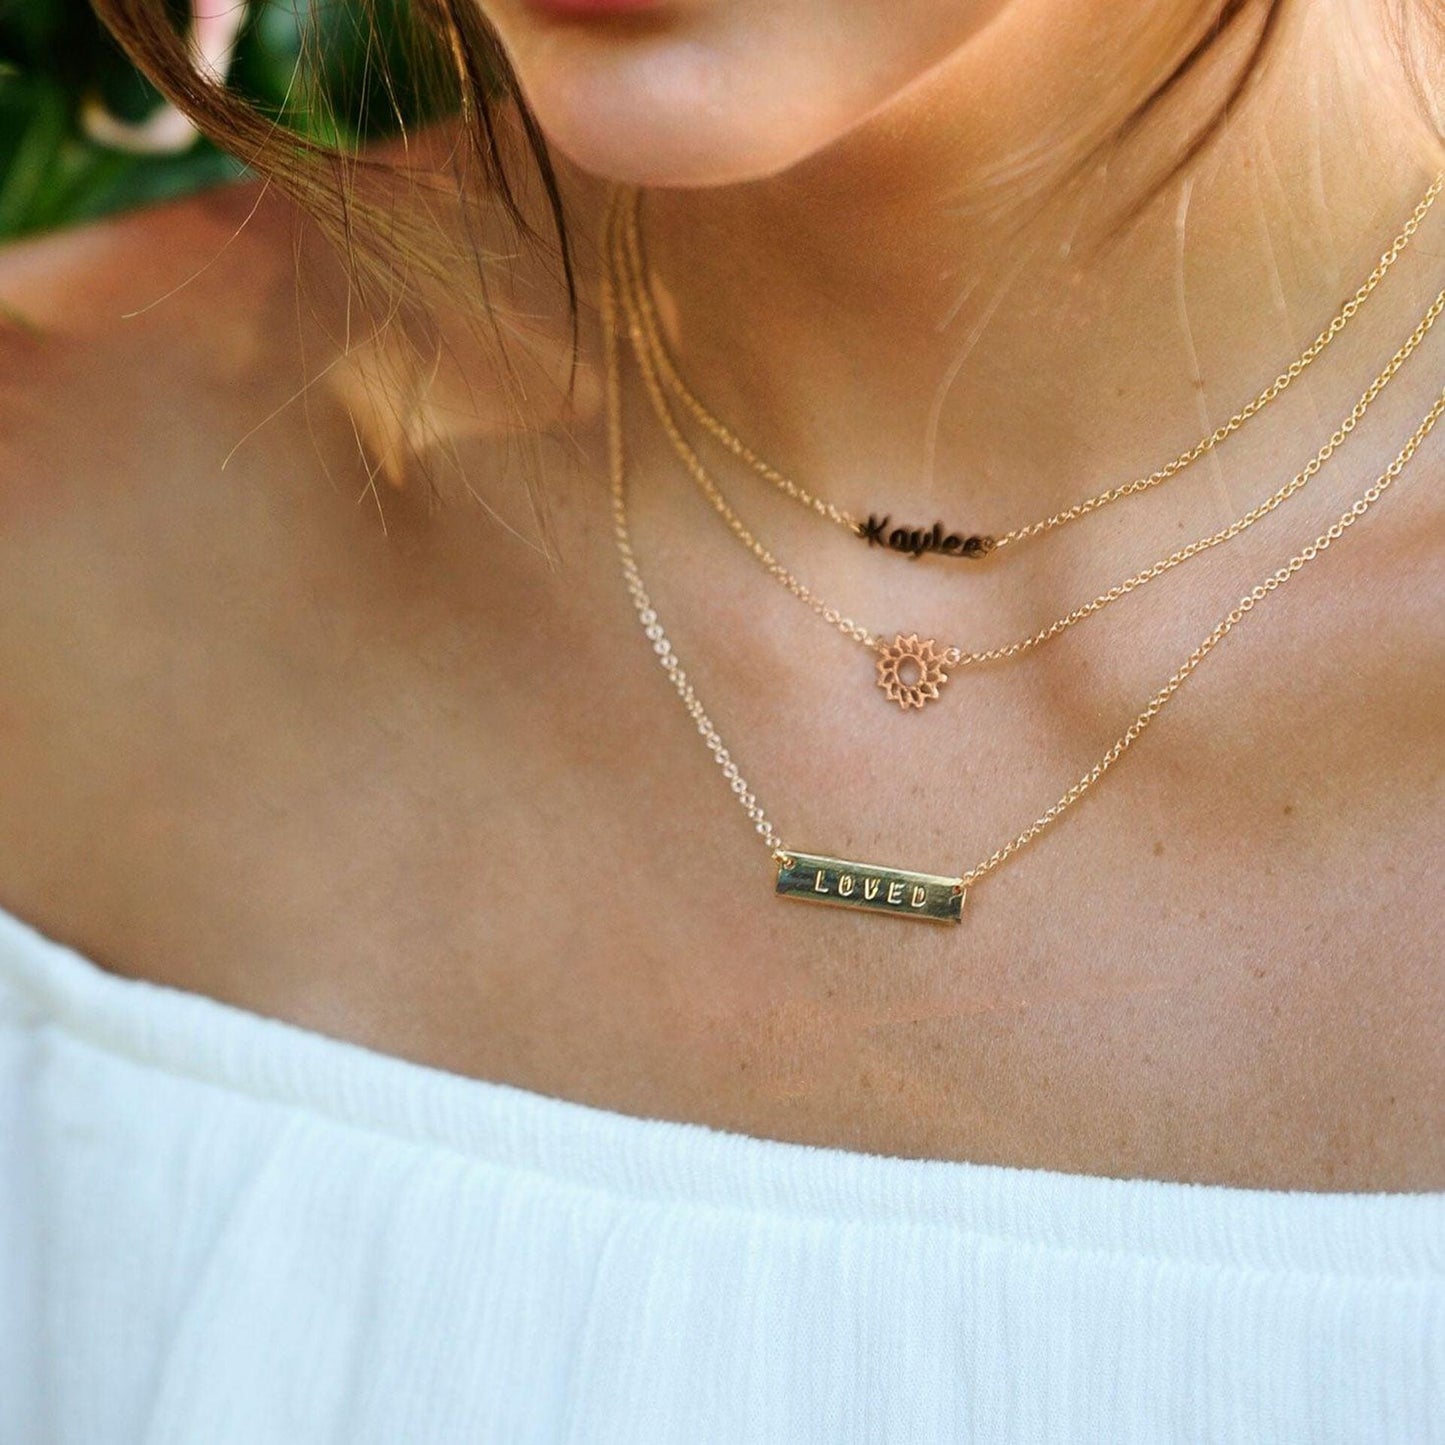 Lumiela Personalized Initial Letter B Necklace in Gold Tone